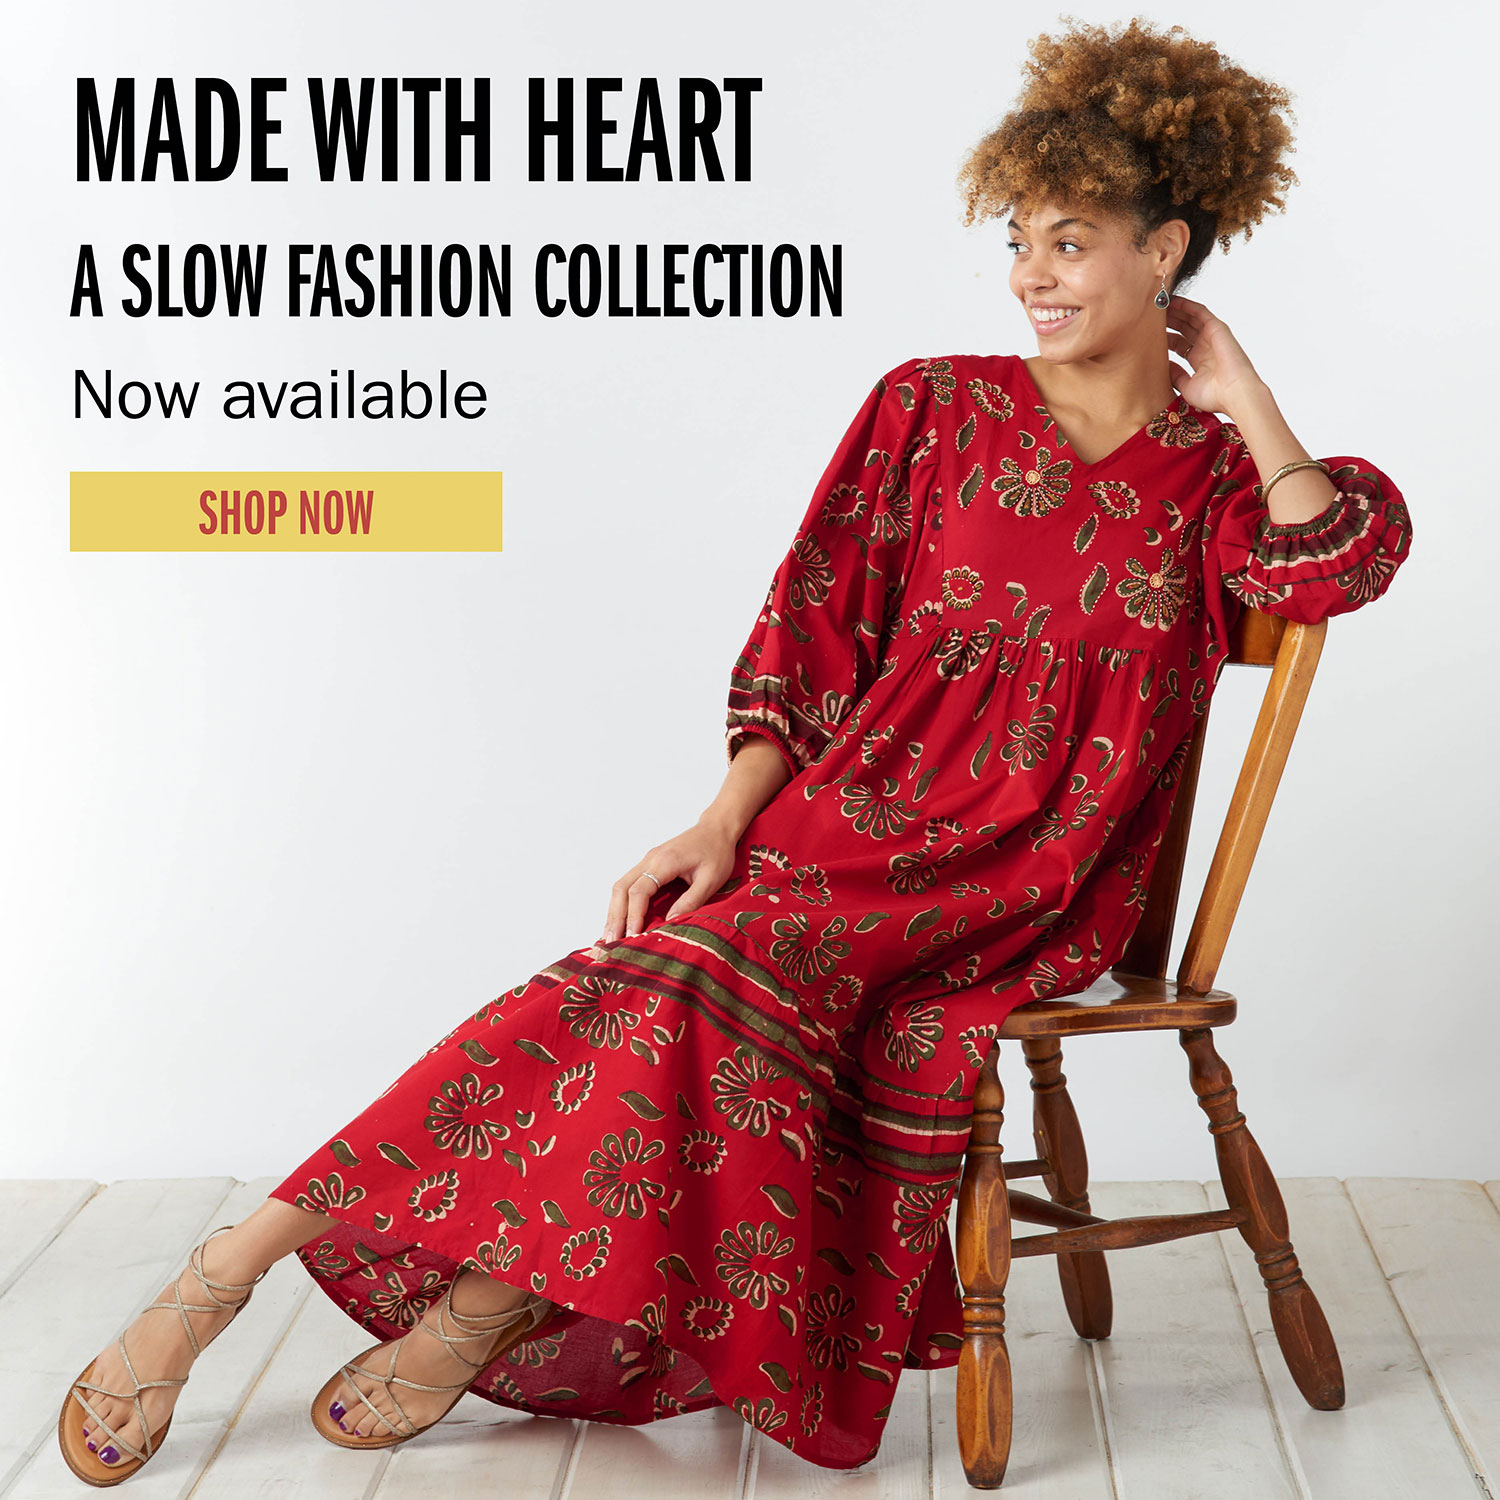 MADE WITH HEART A SLOW FASHION COLLECTION Now available SHOP NOW